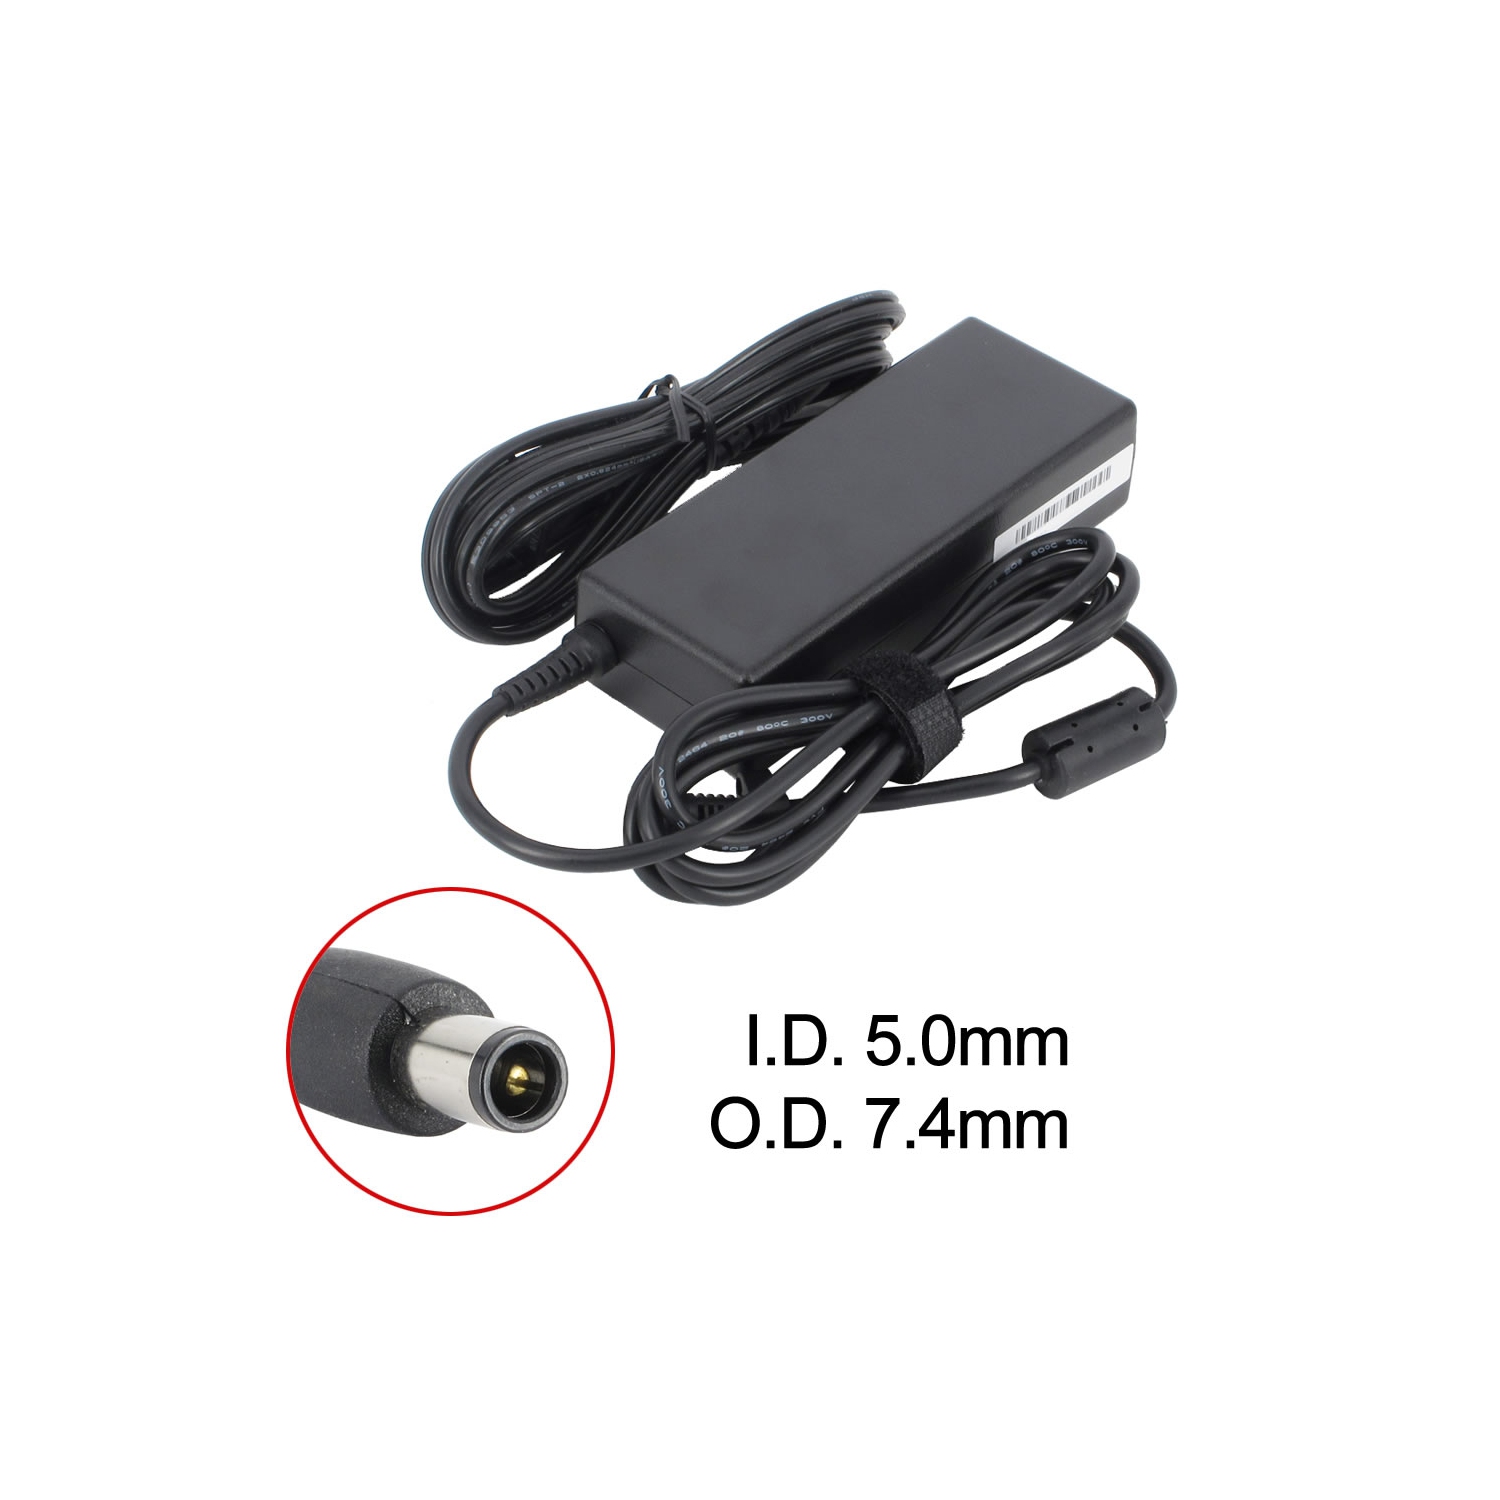 New Laptop AC Adapter for HP Pavilion DV7-6C20, 397824-001, 463553-001, 608425-002, ED495ET, PA-1900-18H2, PPP014S-S